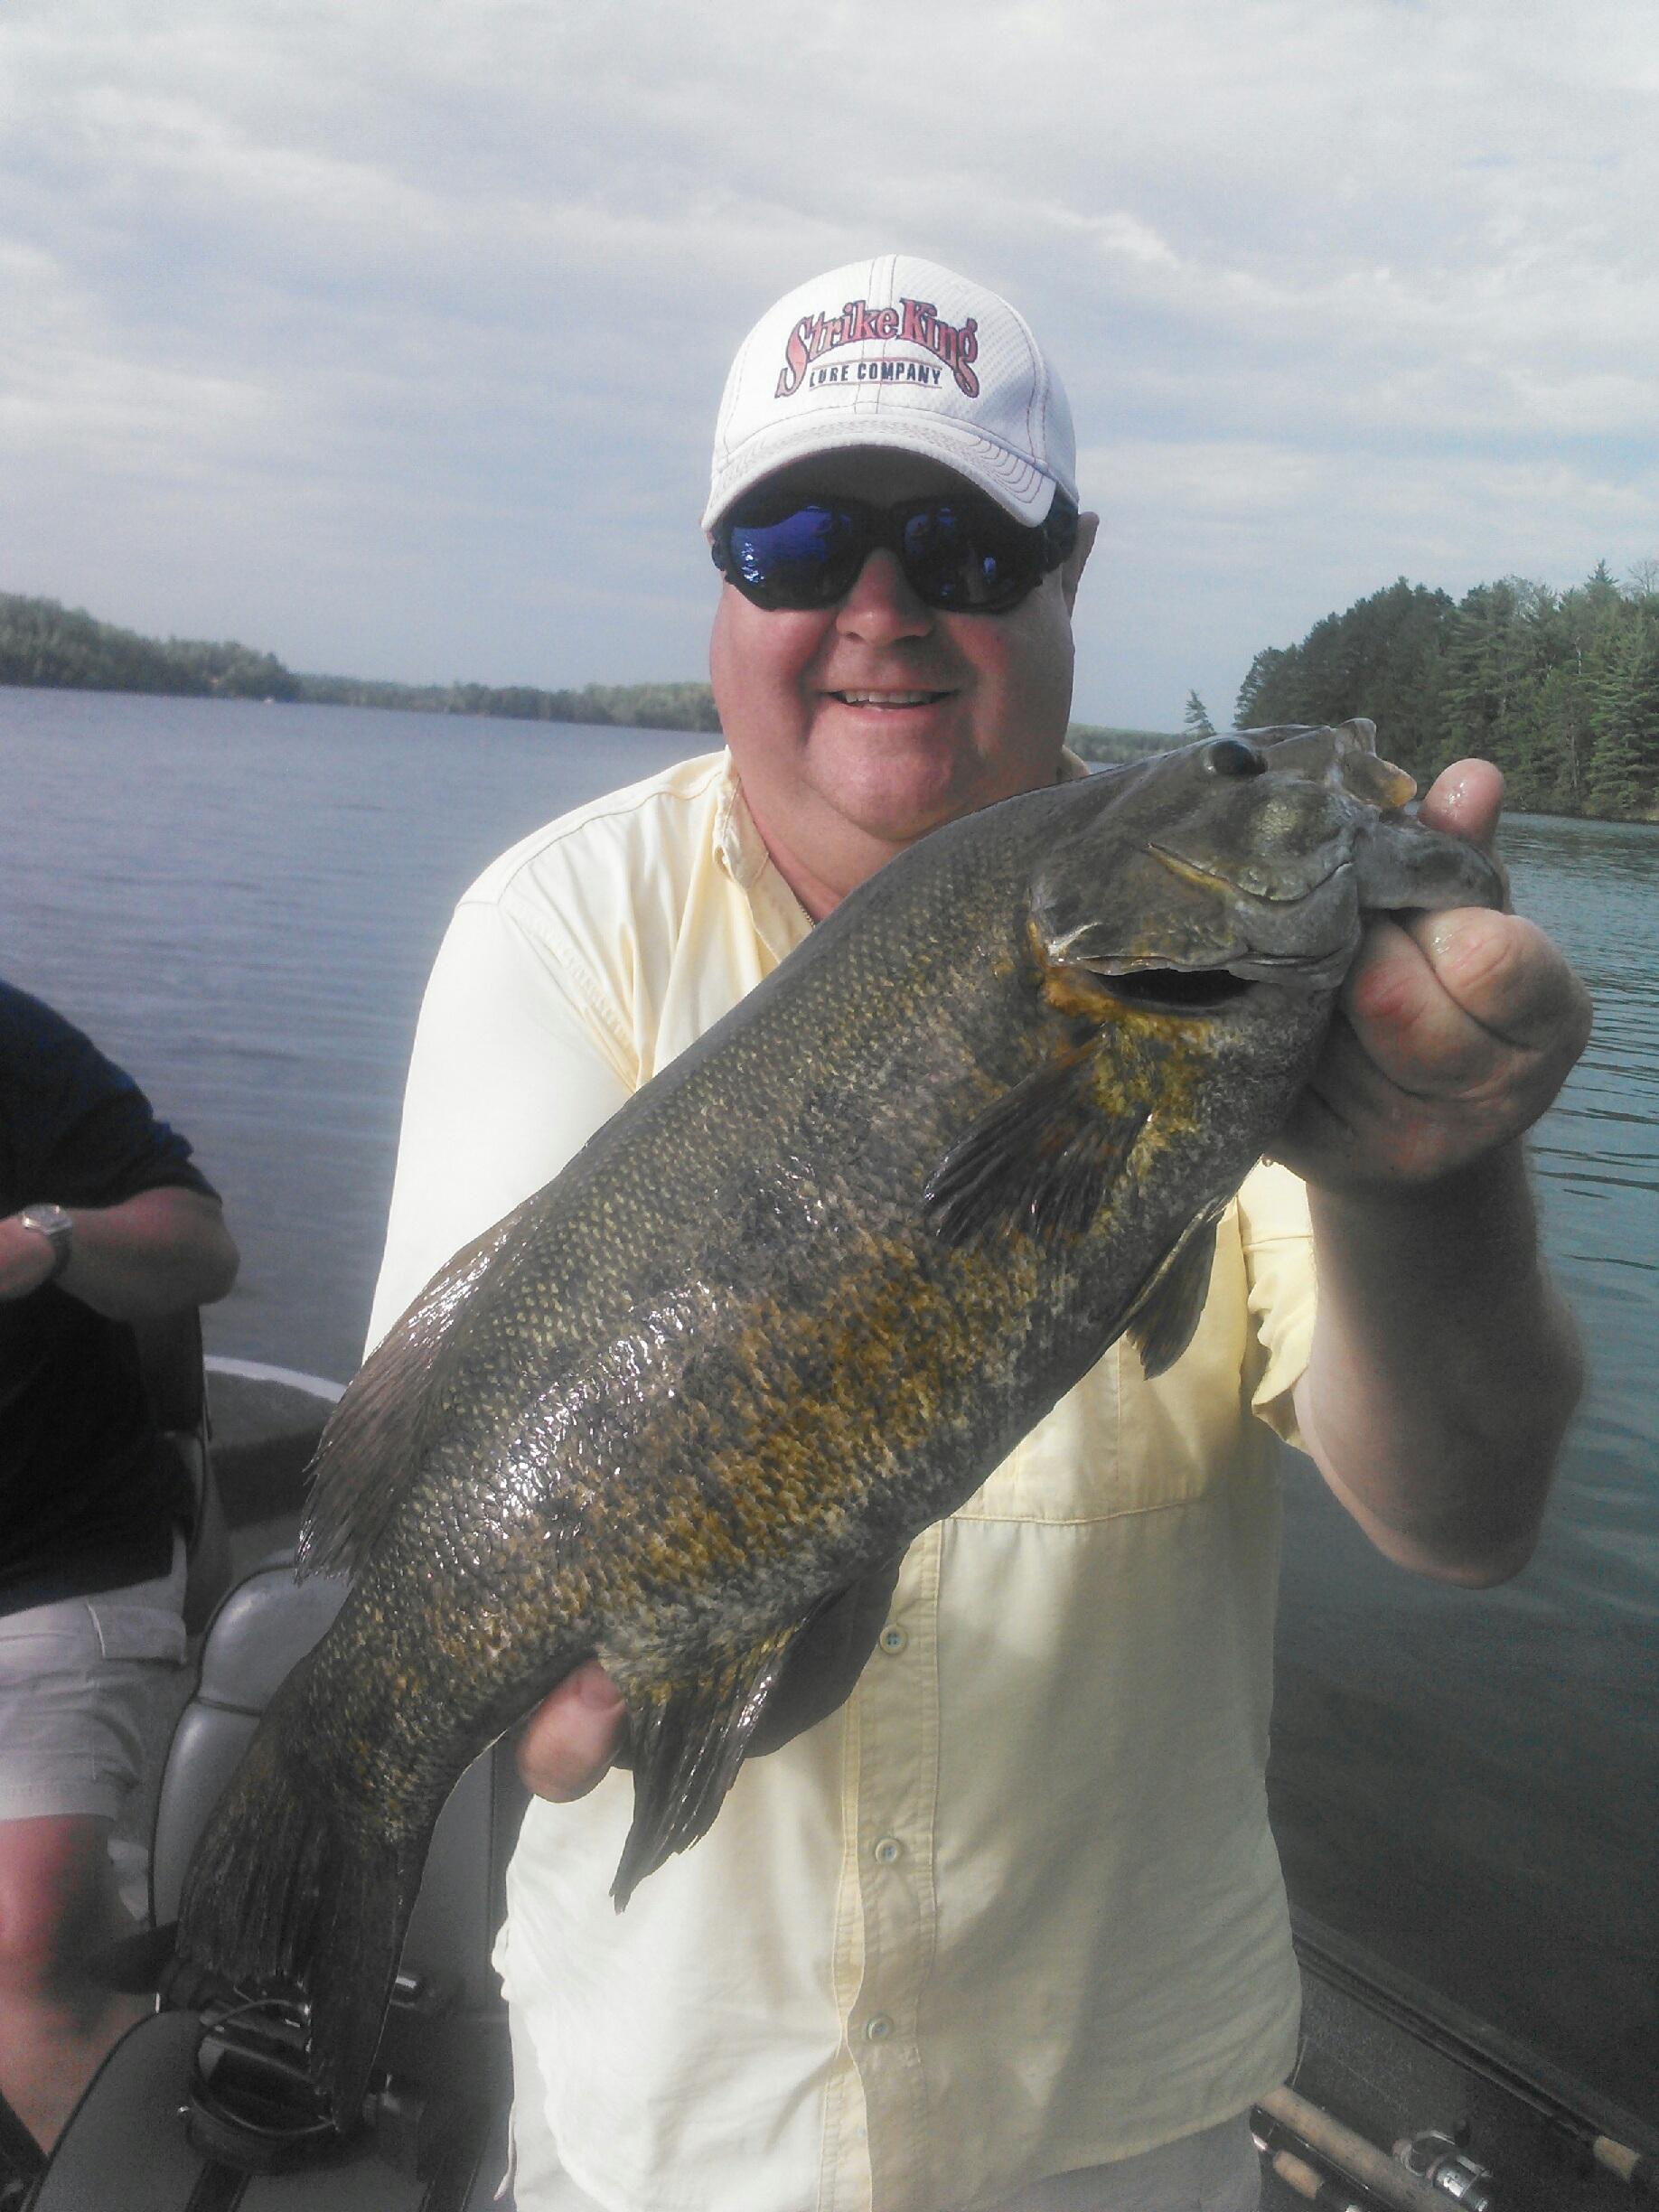 Roger's 23 1/2 inch 6 pound small mouth bass was the success story of the weekend.